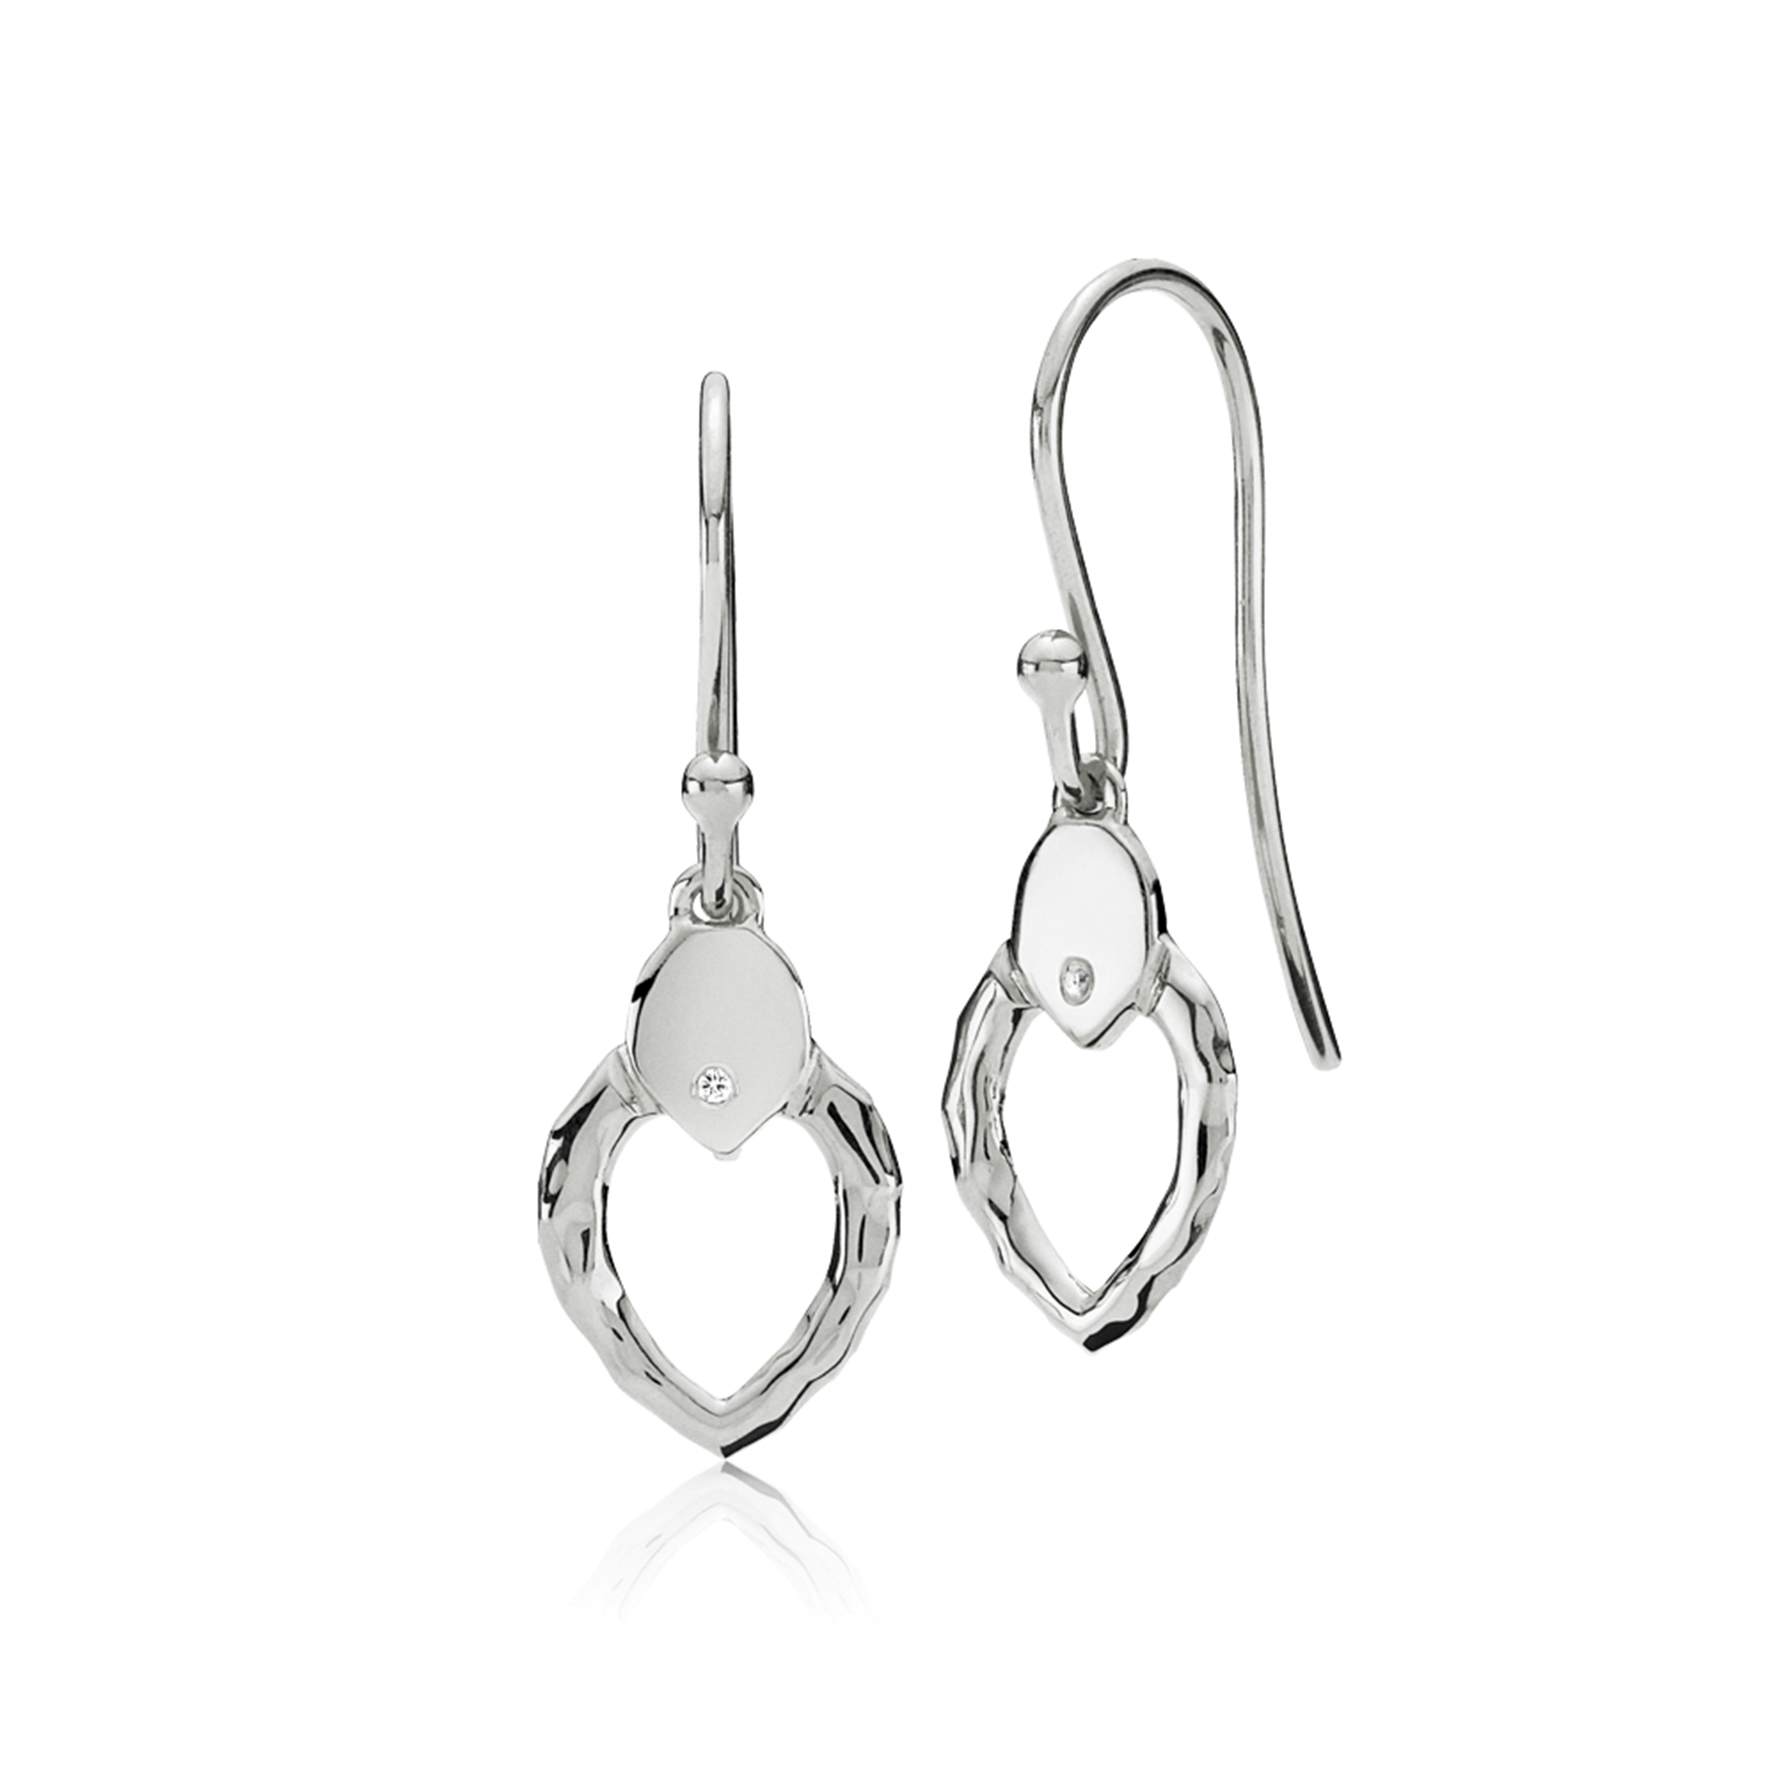 Cecilie Schmeichel Small Earrings från Izabel Camille i Silver Sterling 925